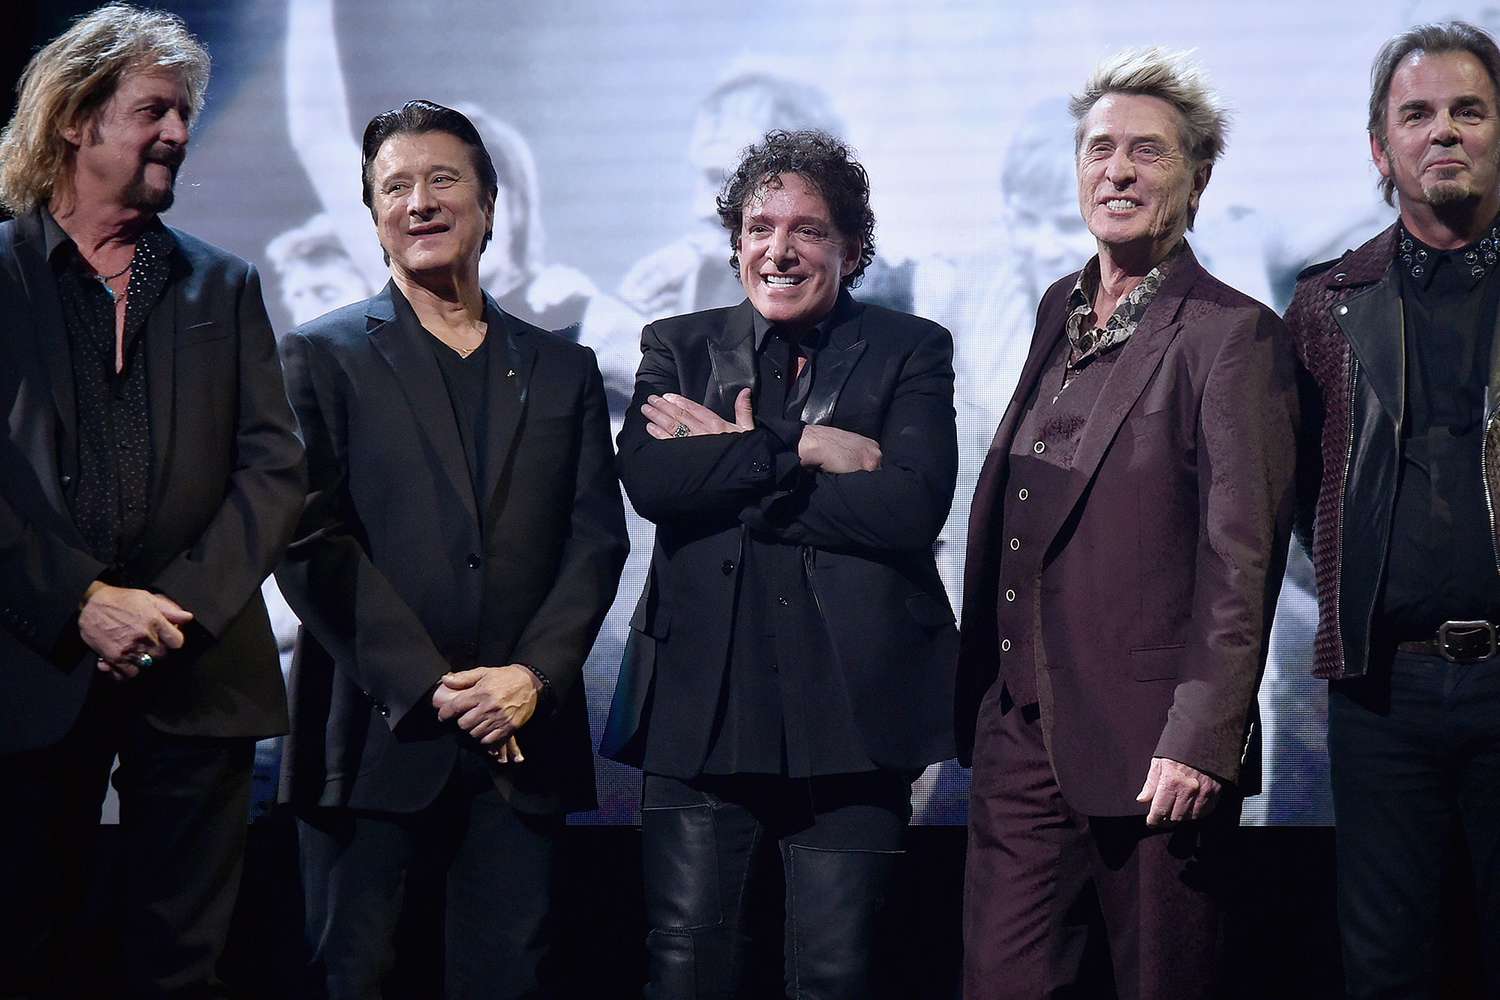 Steve Perry Reunites with Journey at Rock Hall Induction